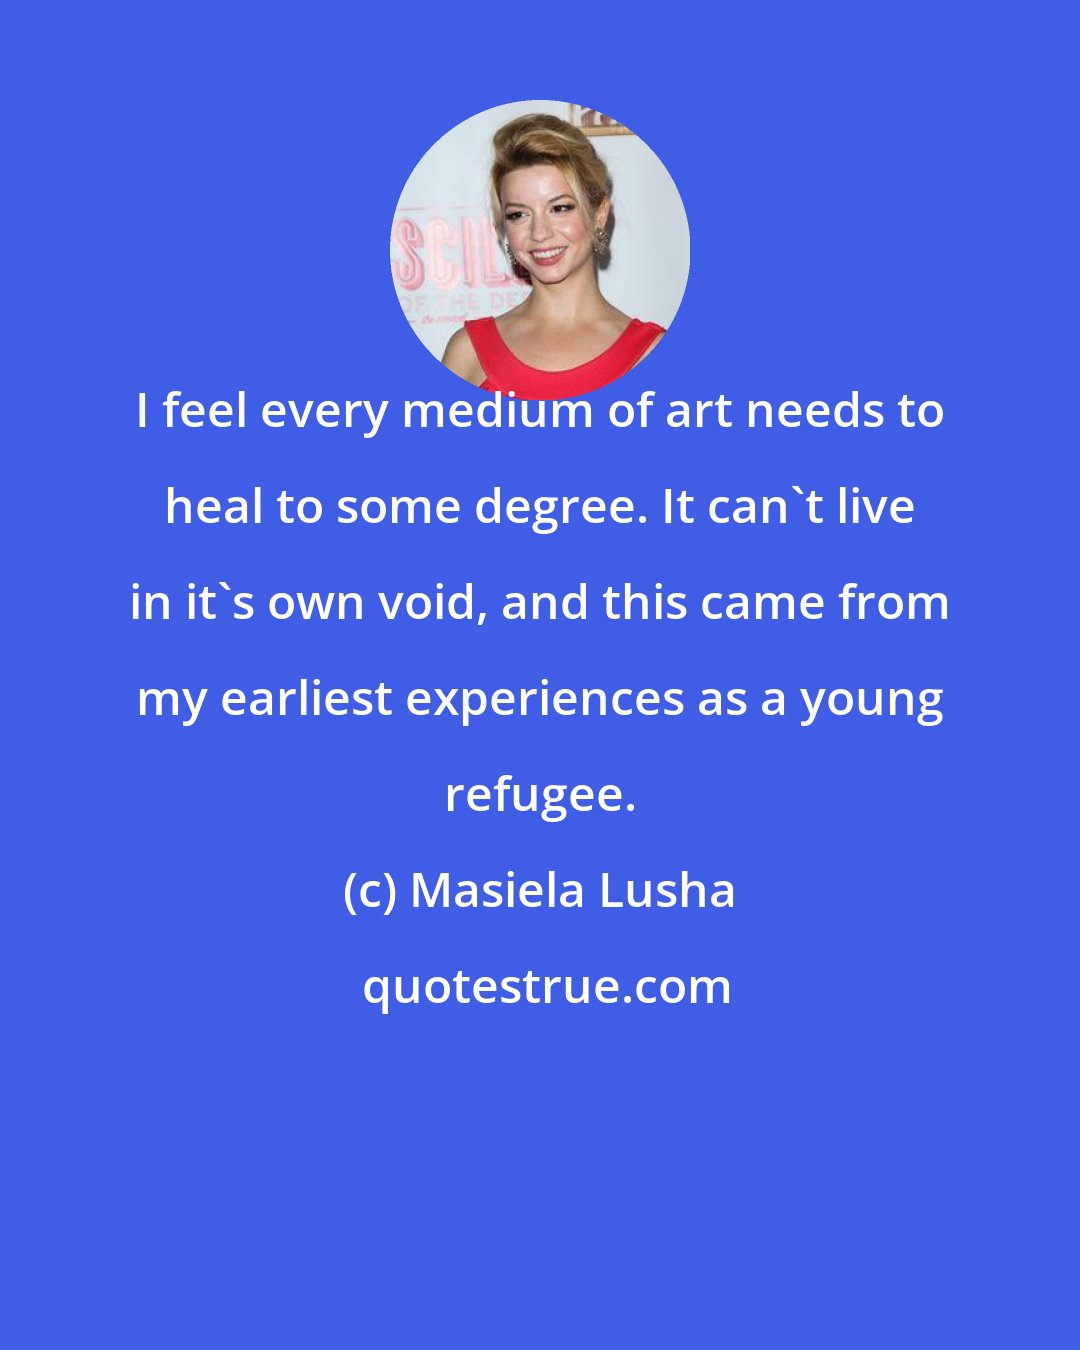 Masiela Lusha: I feel every medium of art needs to heal to some degree. It can't live in it's own void, and this came from my earliest experiences as a young refugee.